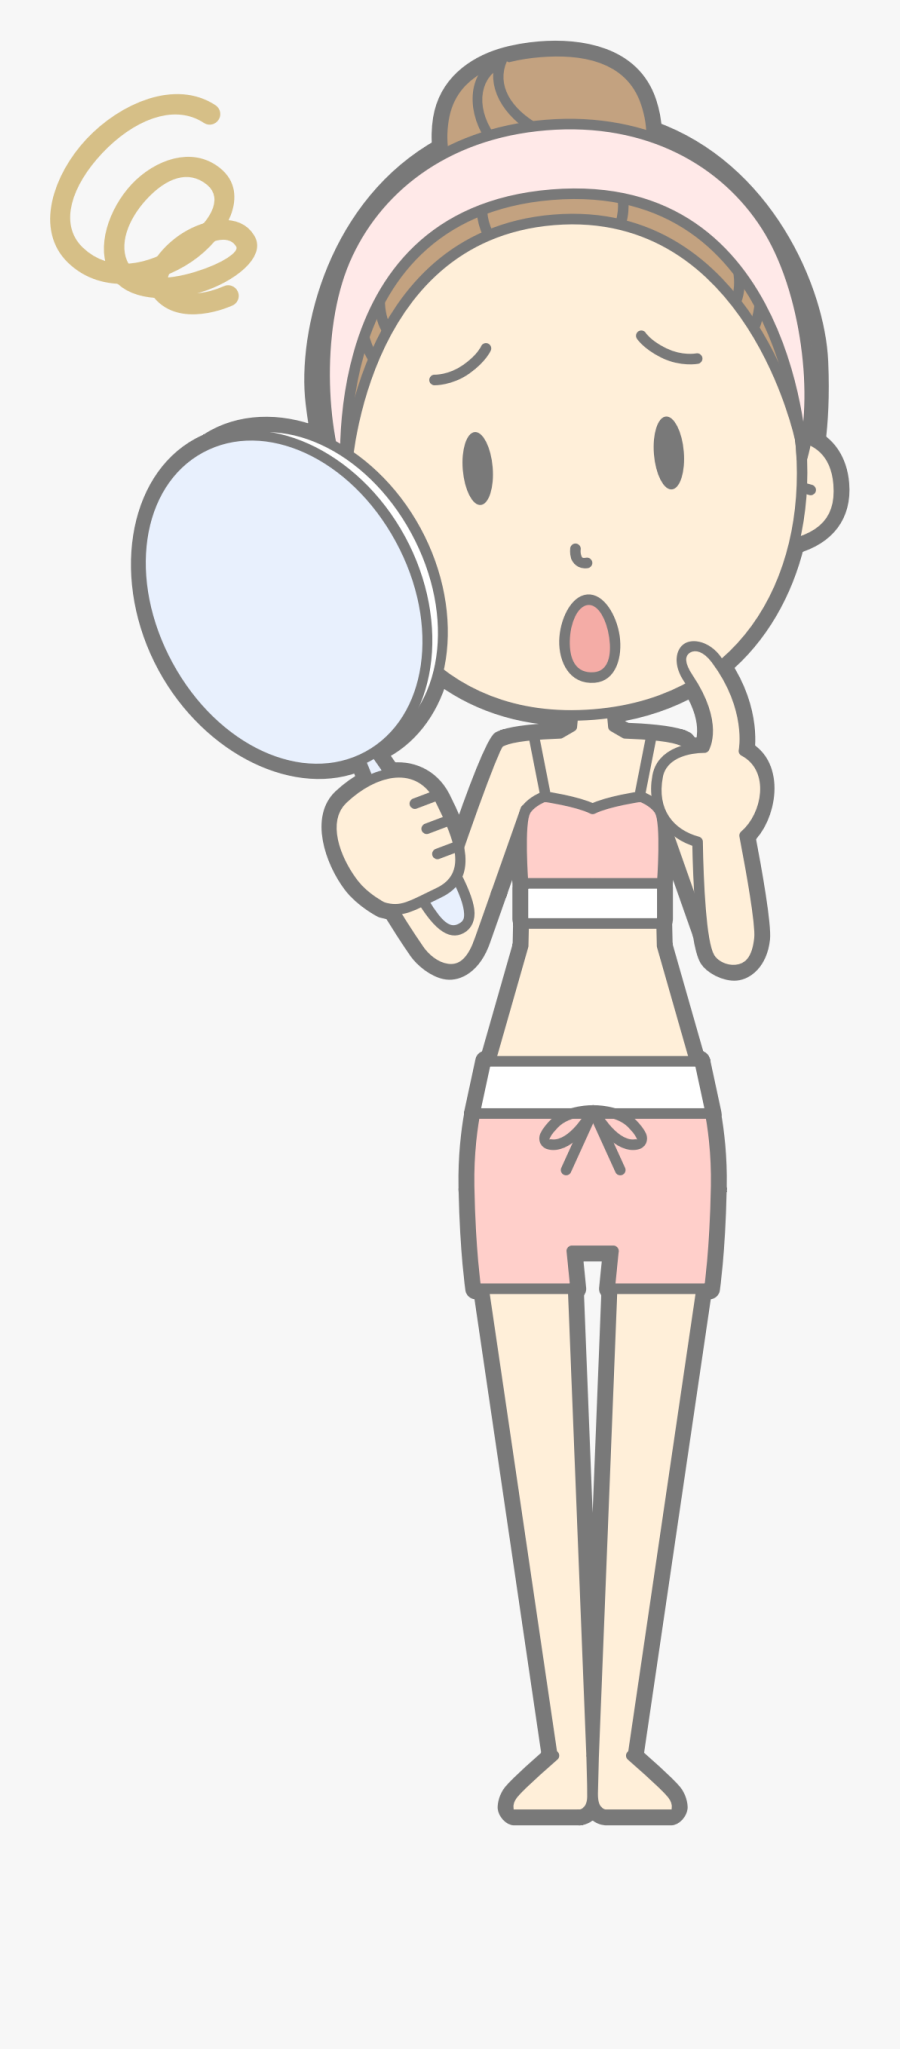 Look Clip Mirror - Looking In The Mirror Clipart, Transparent Clipart